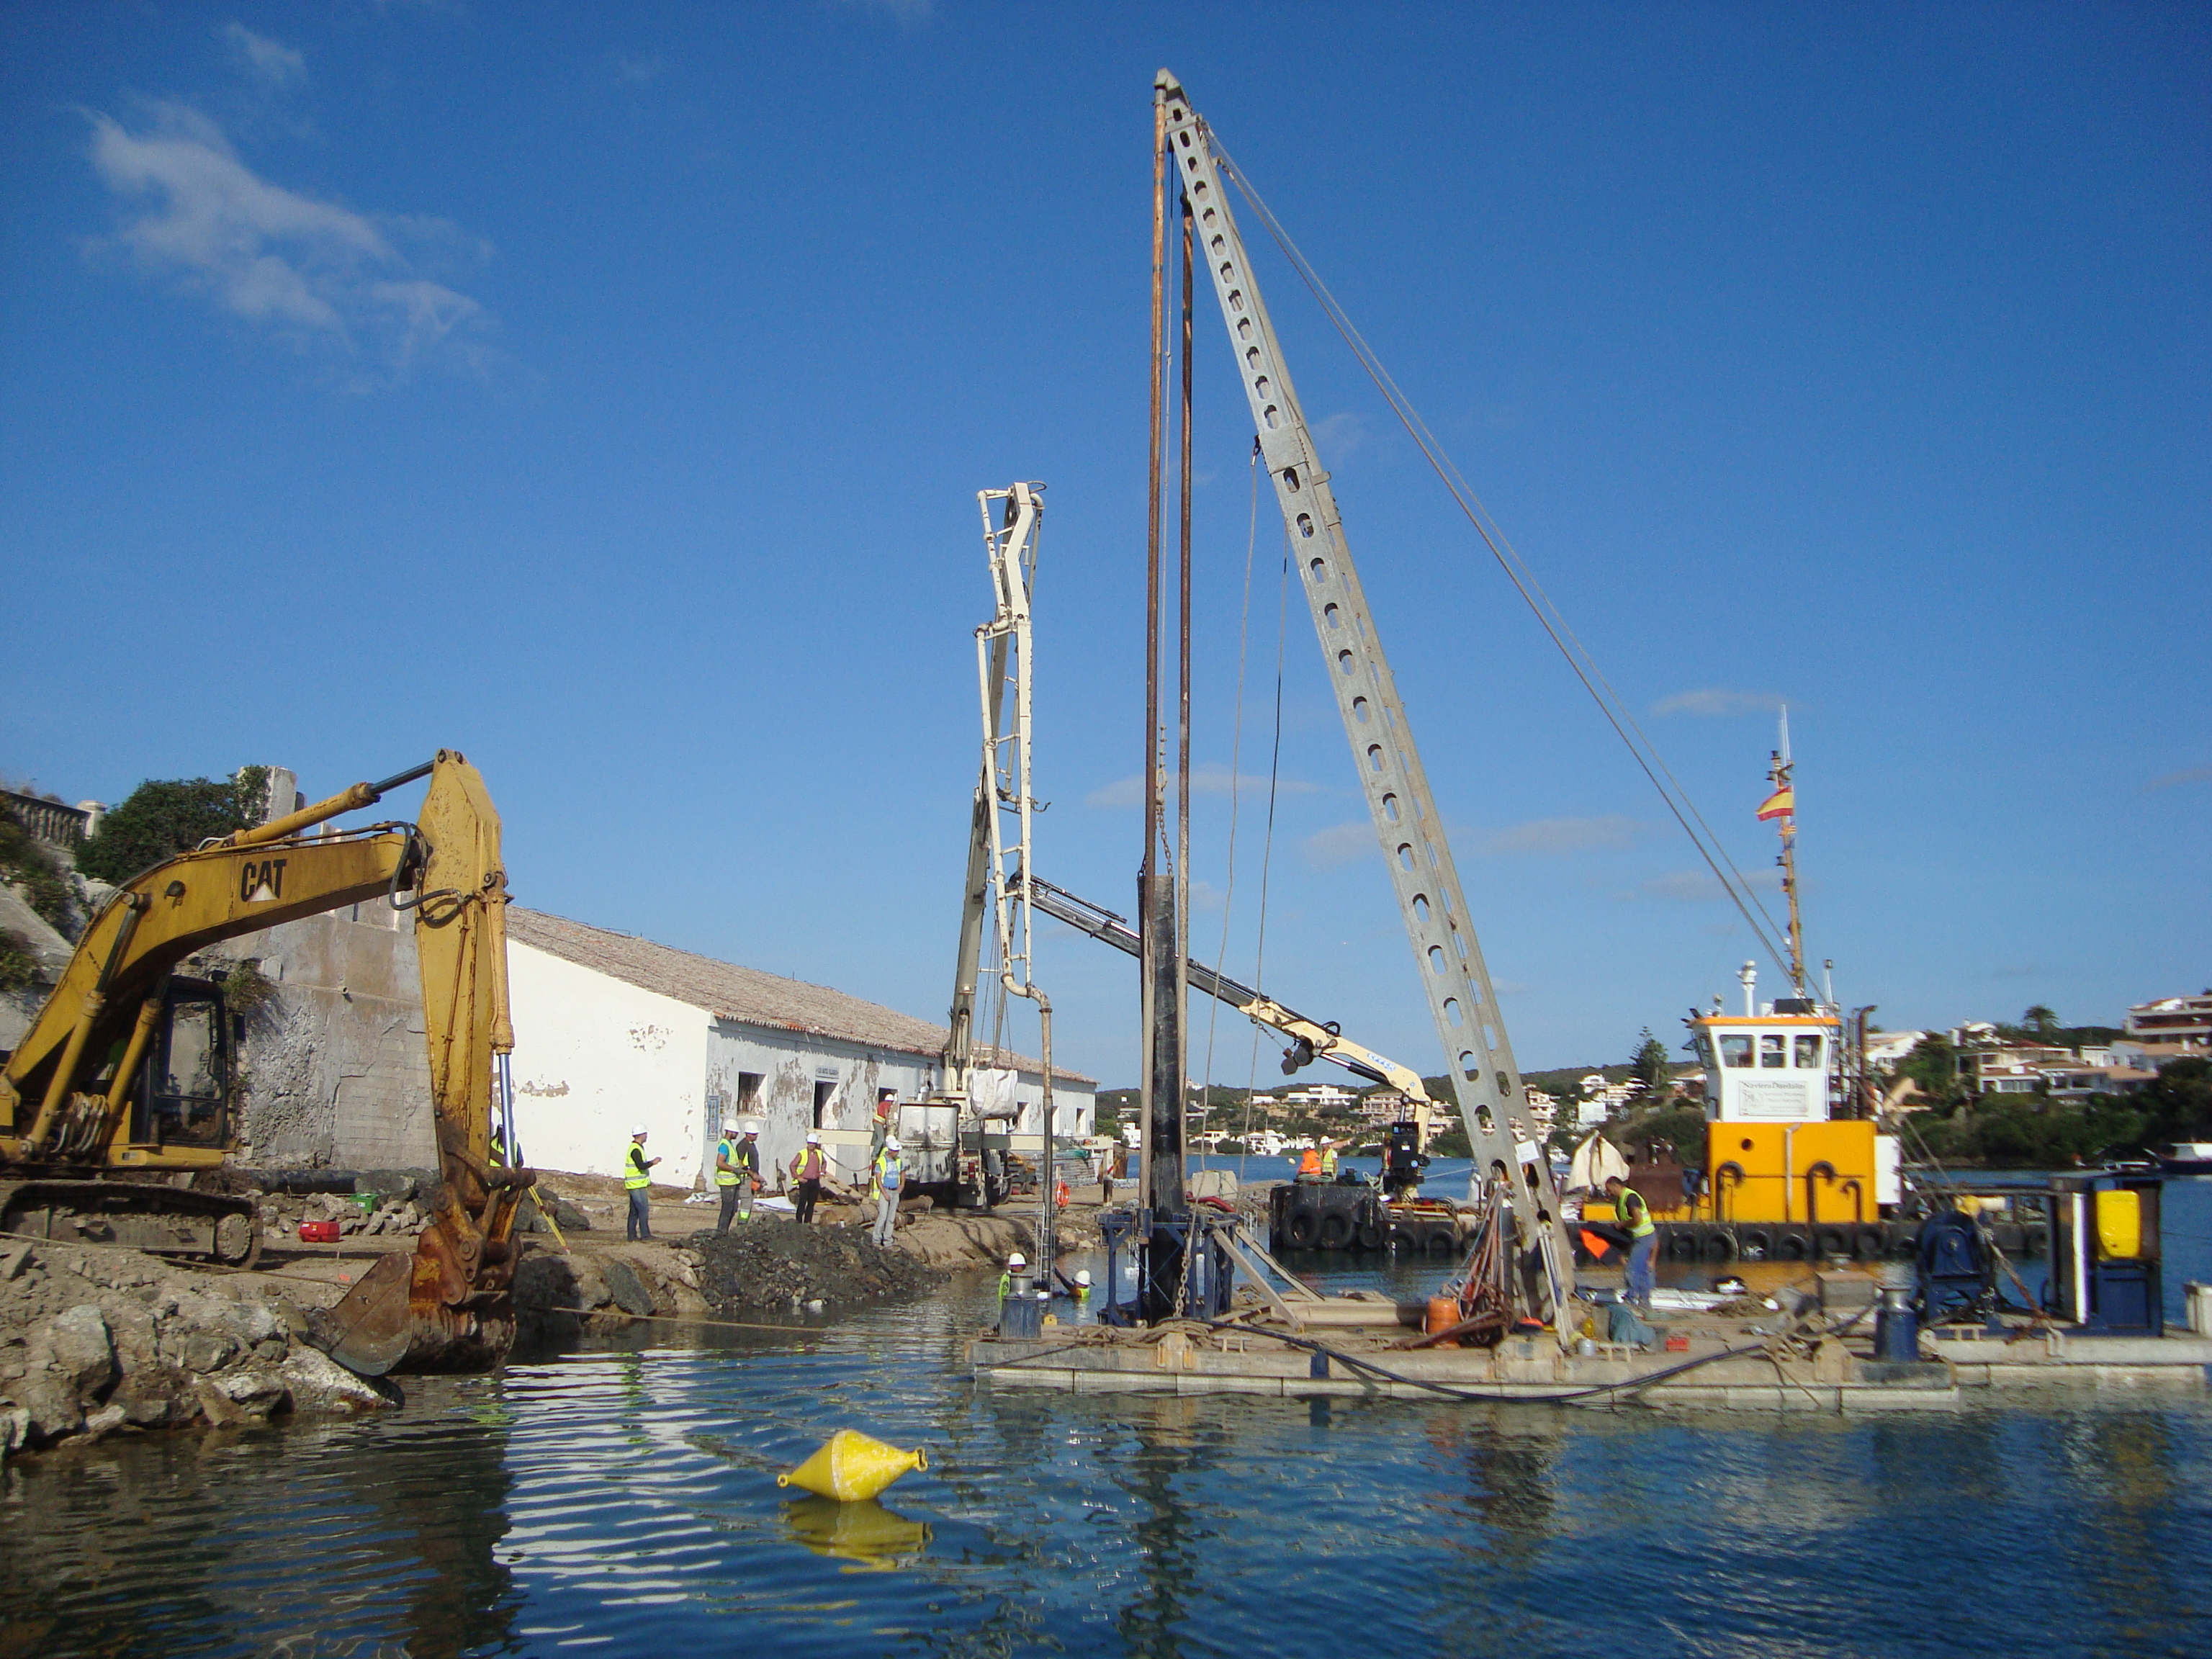 Works on S'Illa Plana at Port of Maó now underway